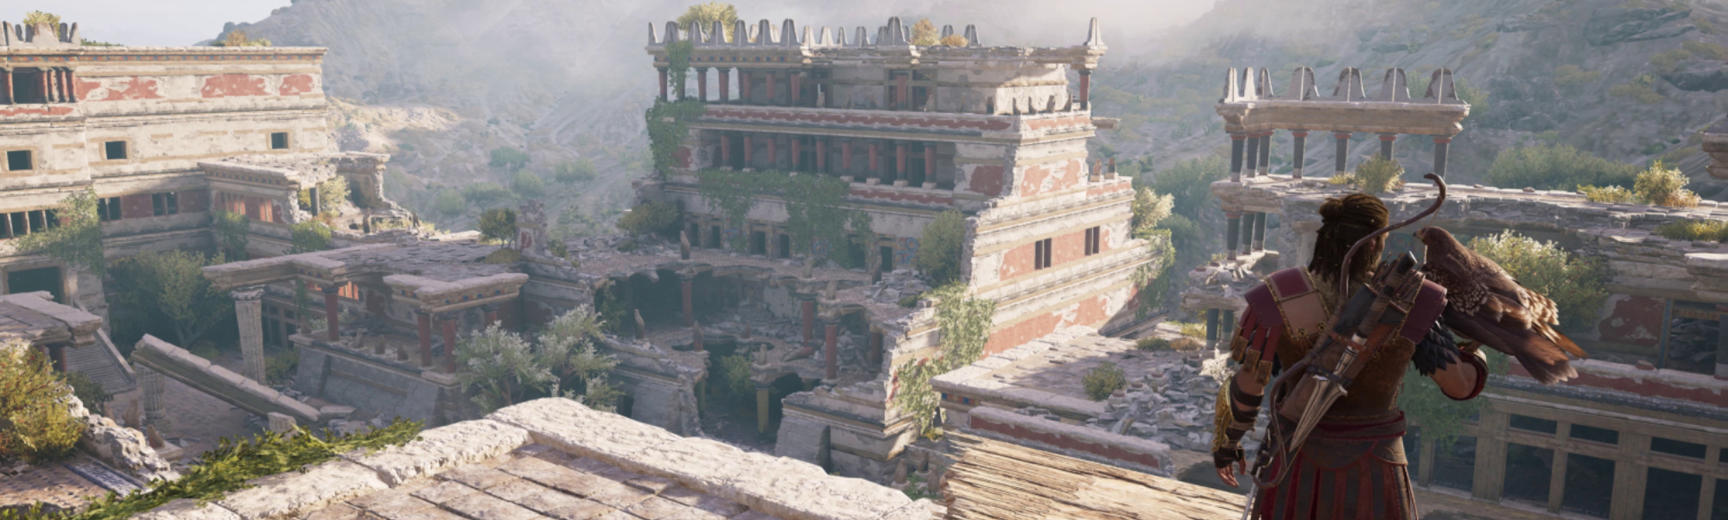 Still from the Assassin's Creed Odyssey video game with a player looking out at Knossos palace